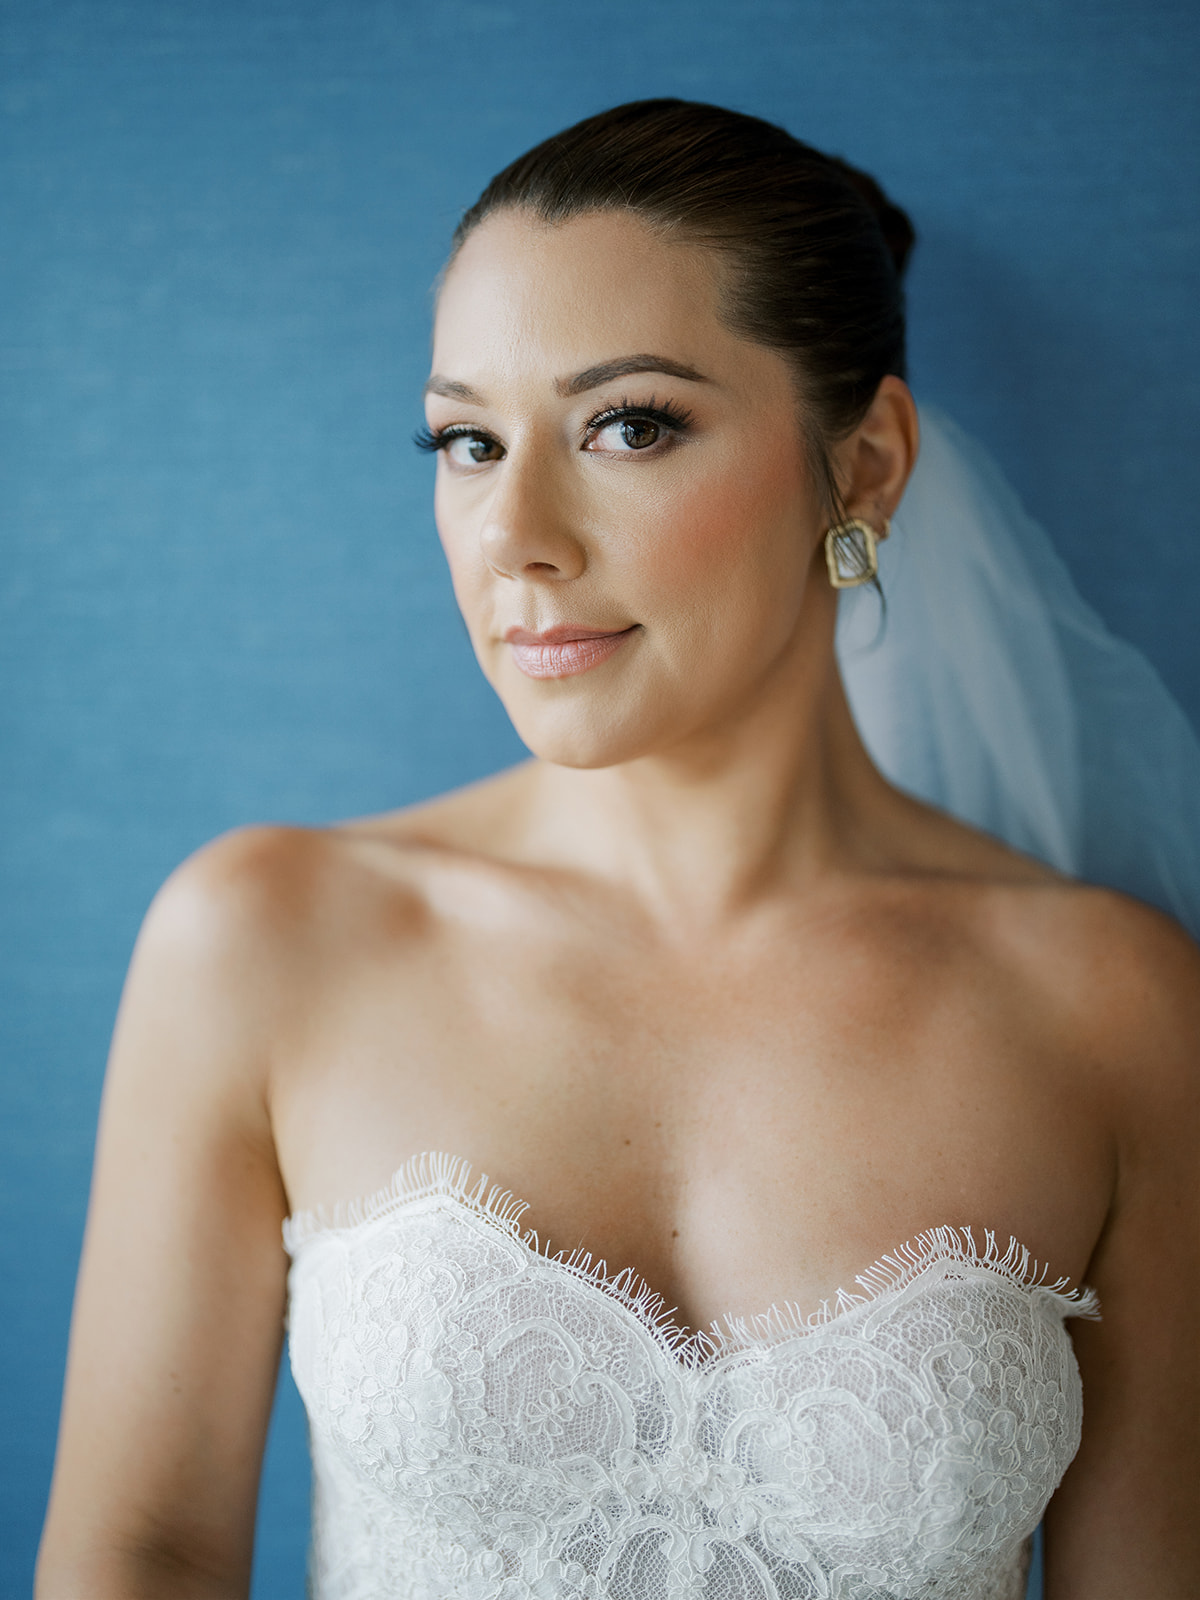 An epic bridal portrait that is one of the 5 Wedding Photos You Need to Take.